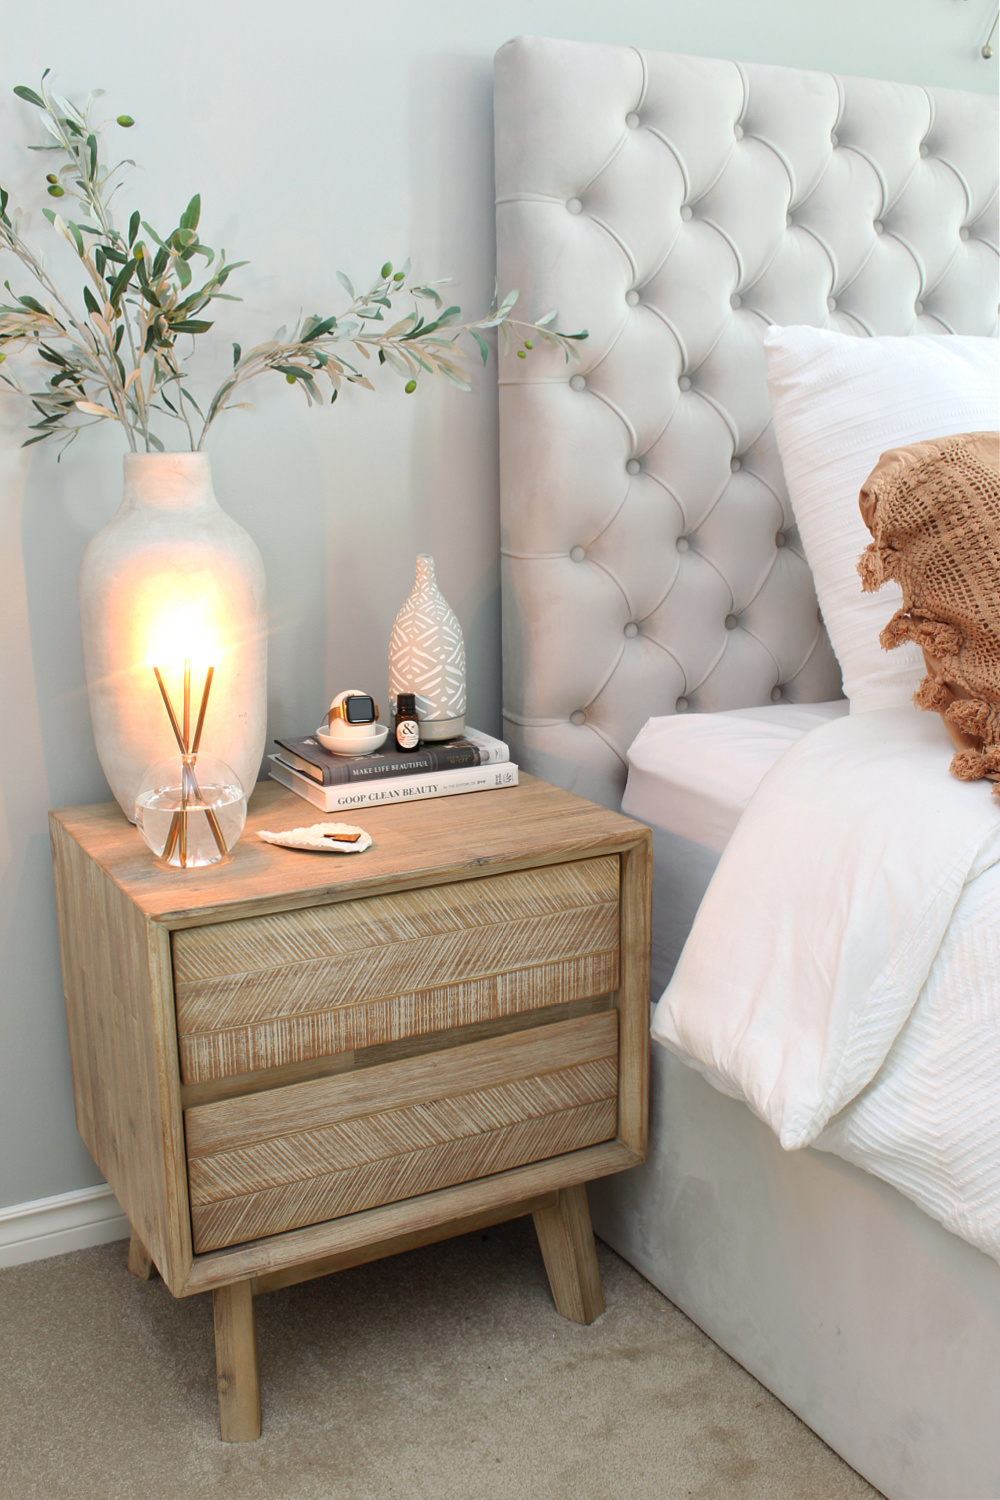 NIghtstand with candle beside an upholstered bed.